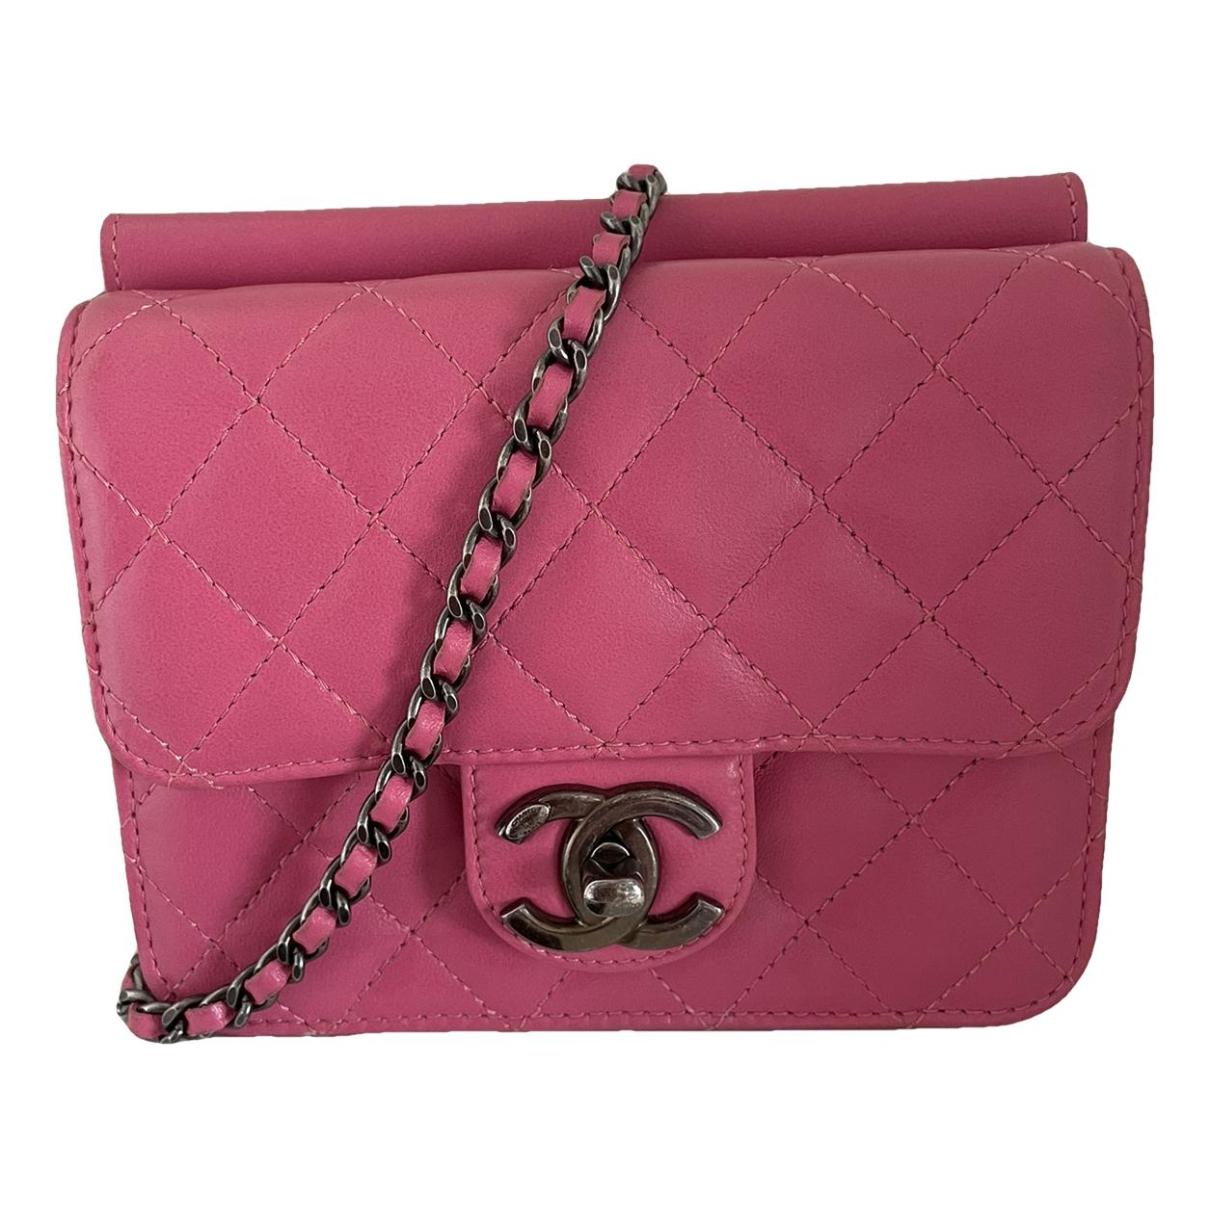 Timeless/classique leather crossbody bag Chanel Pink in Leather - 38773235